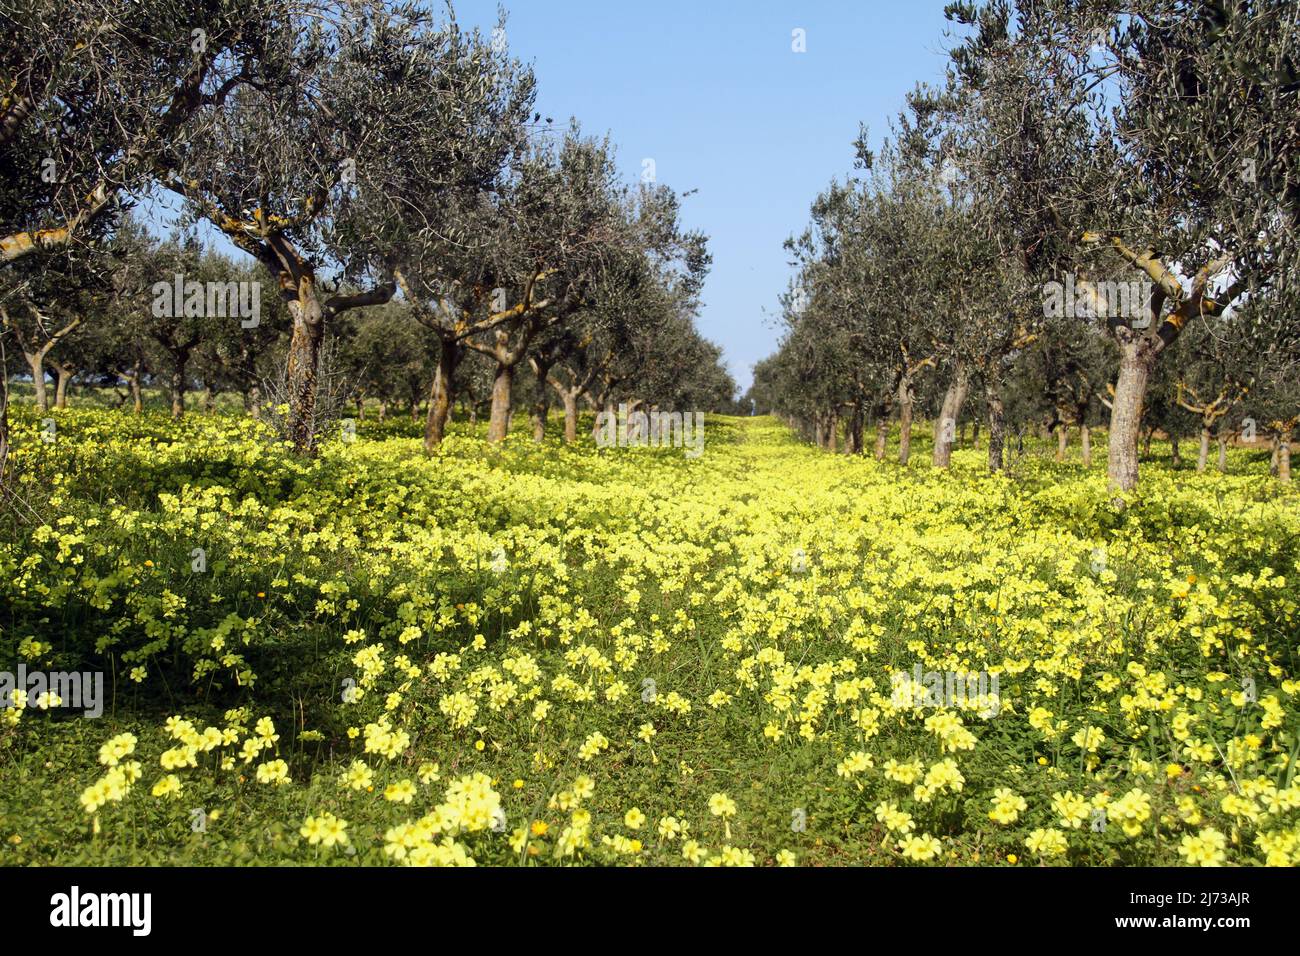 Oxalis pes-caprae (Bowie's wood-sorrel/ Bermuda buttercup) plants in bloom in an orchard in Southern Italy Stock Photo